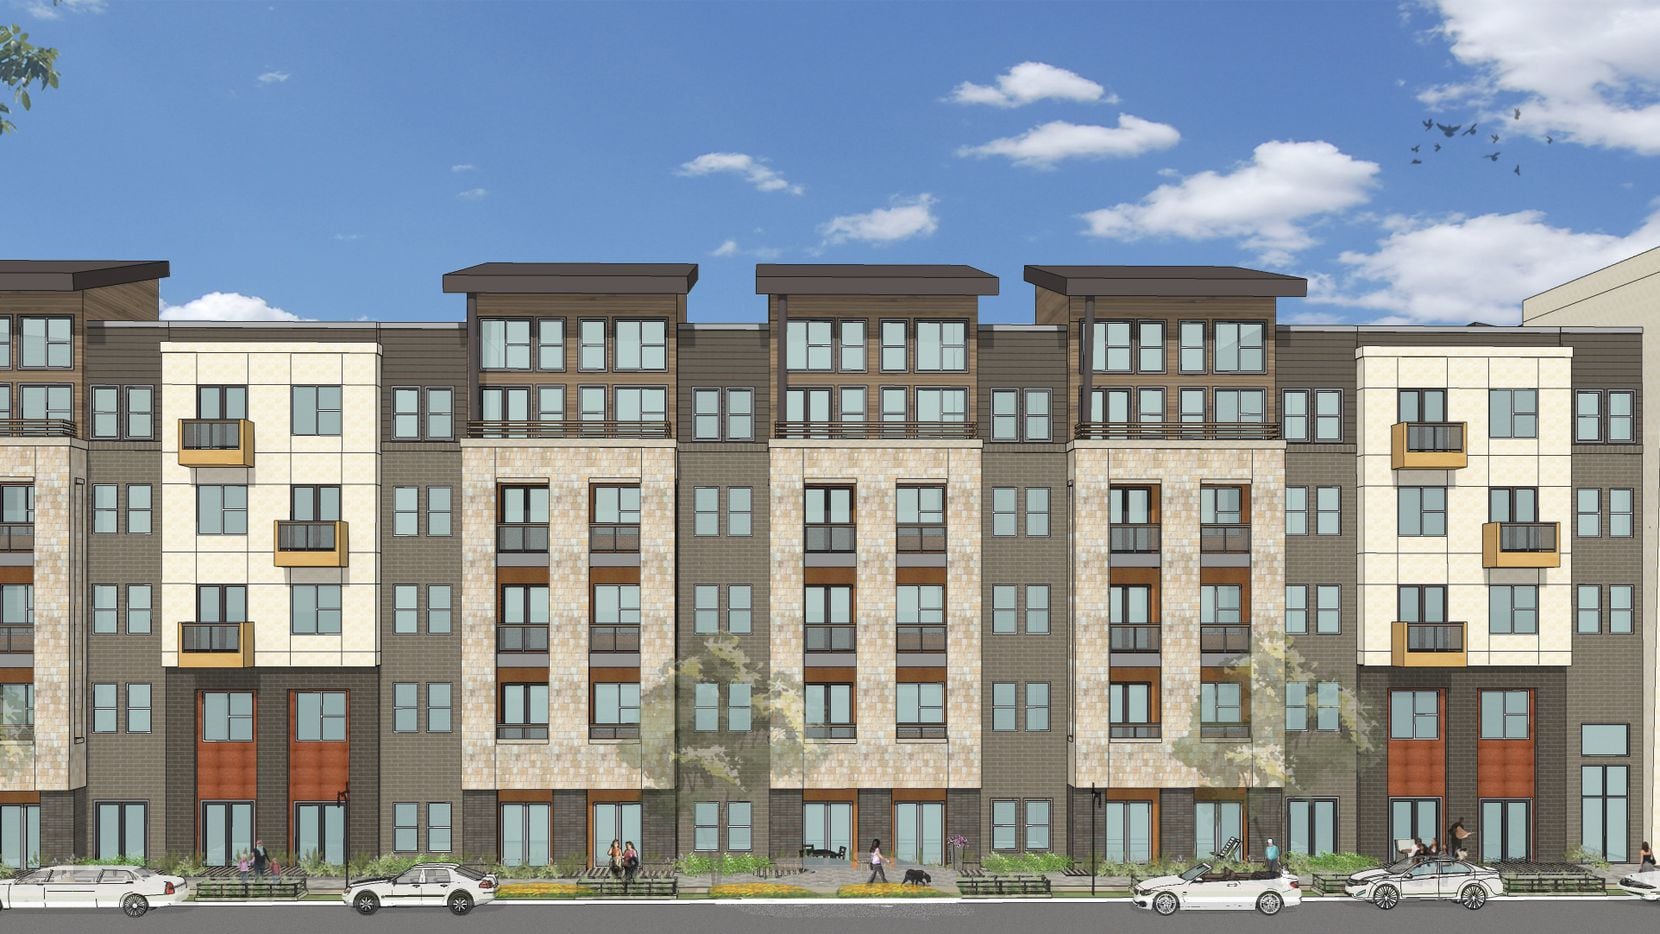 JPI's Routh Creek apartments in Richardson will have 420 units.